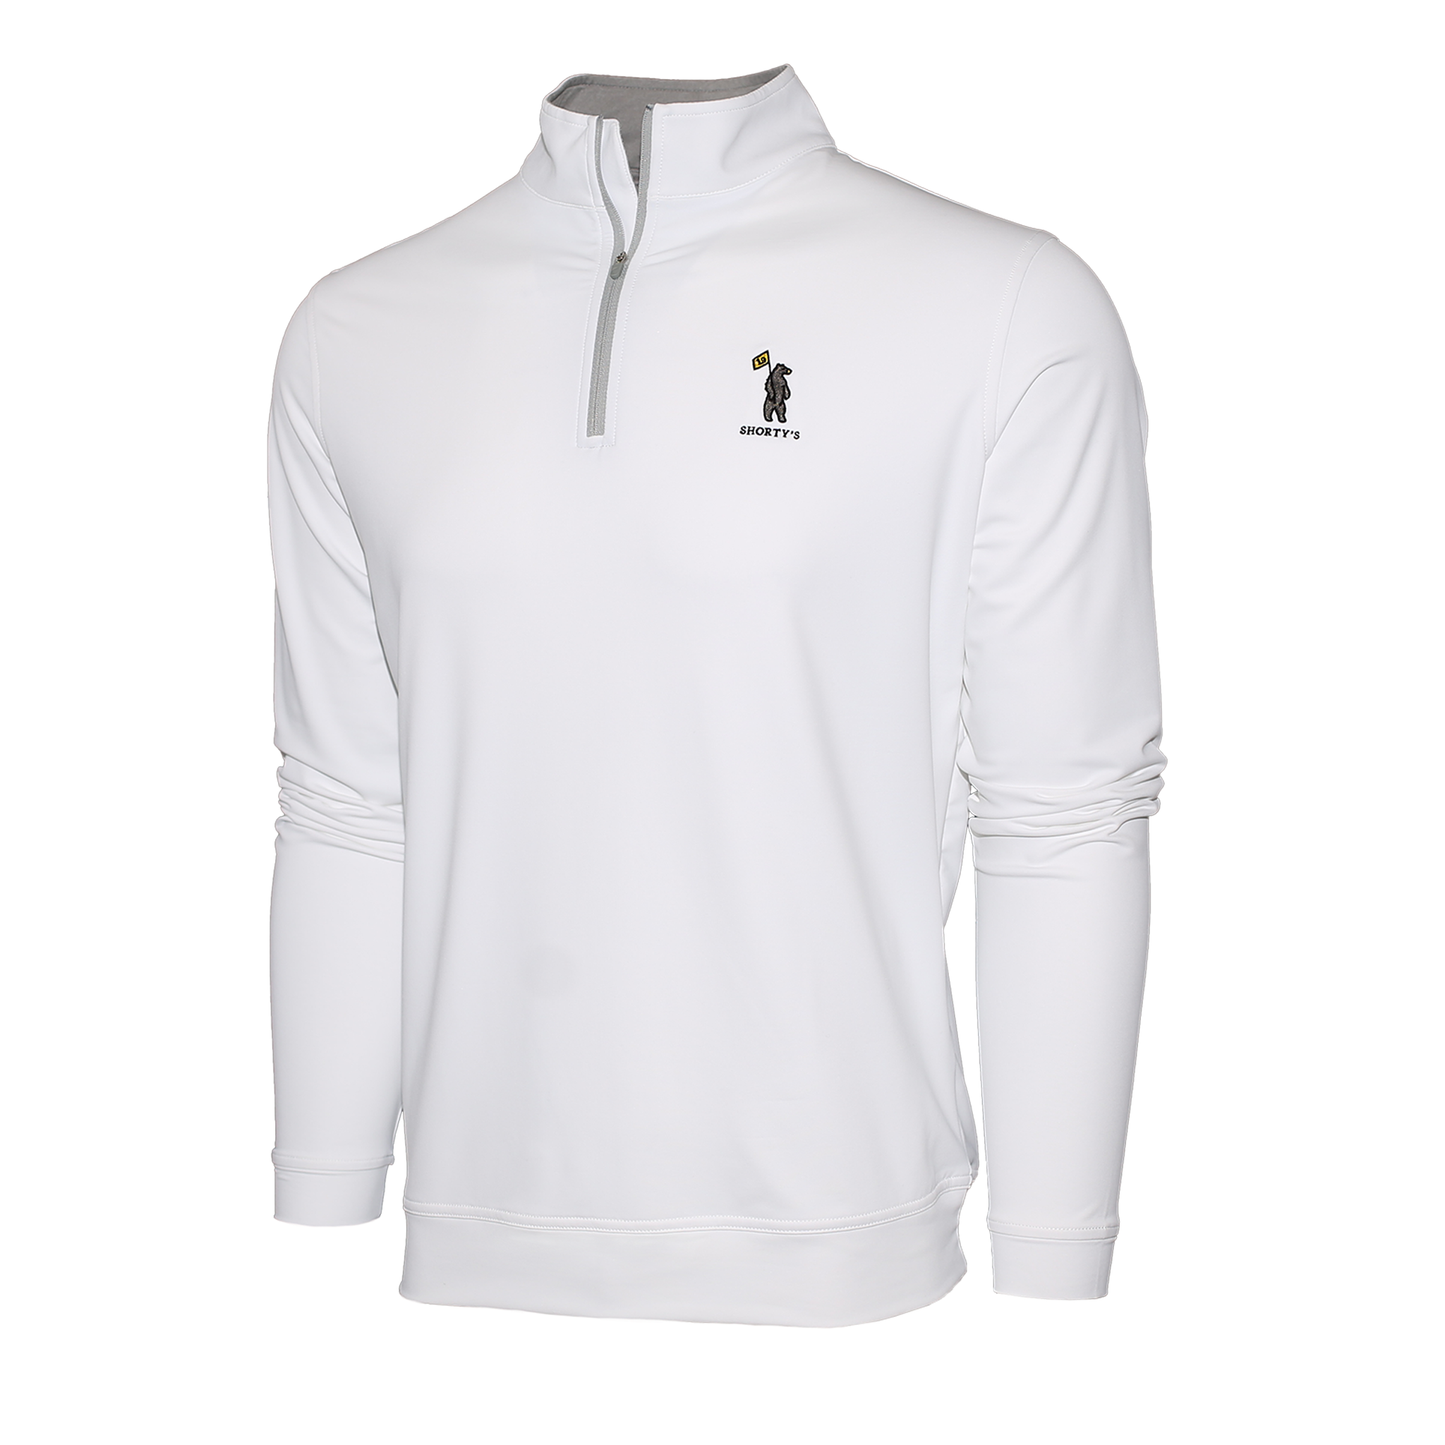 Perth Stretch 1/4 Zip - Shorty's